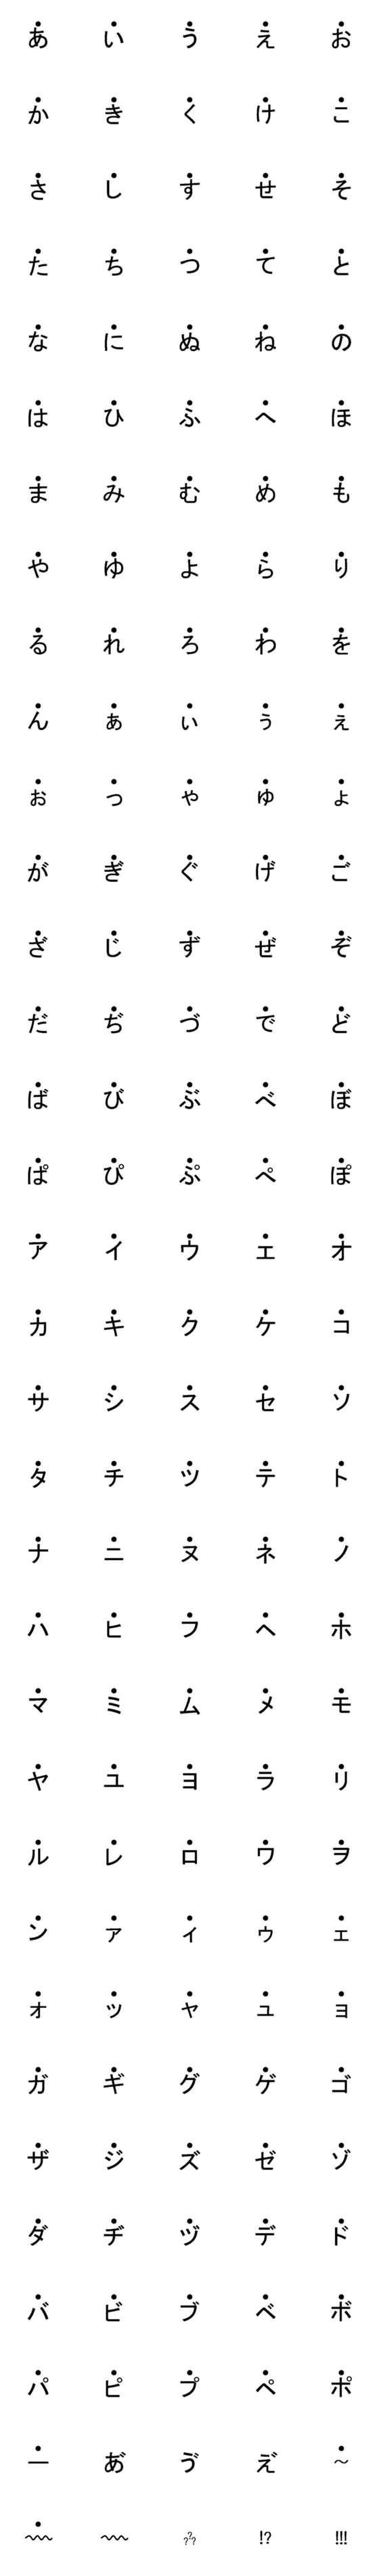 [LINE絵文字]傍点強調文字(ゴシック)通常文字の画像一覧